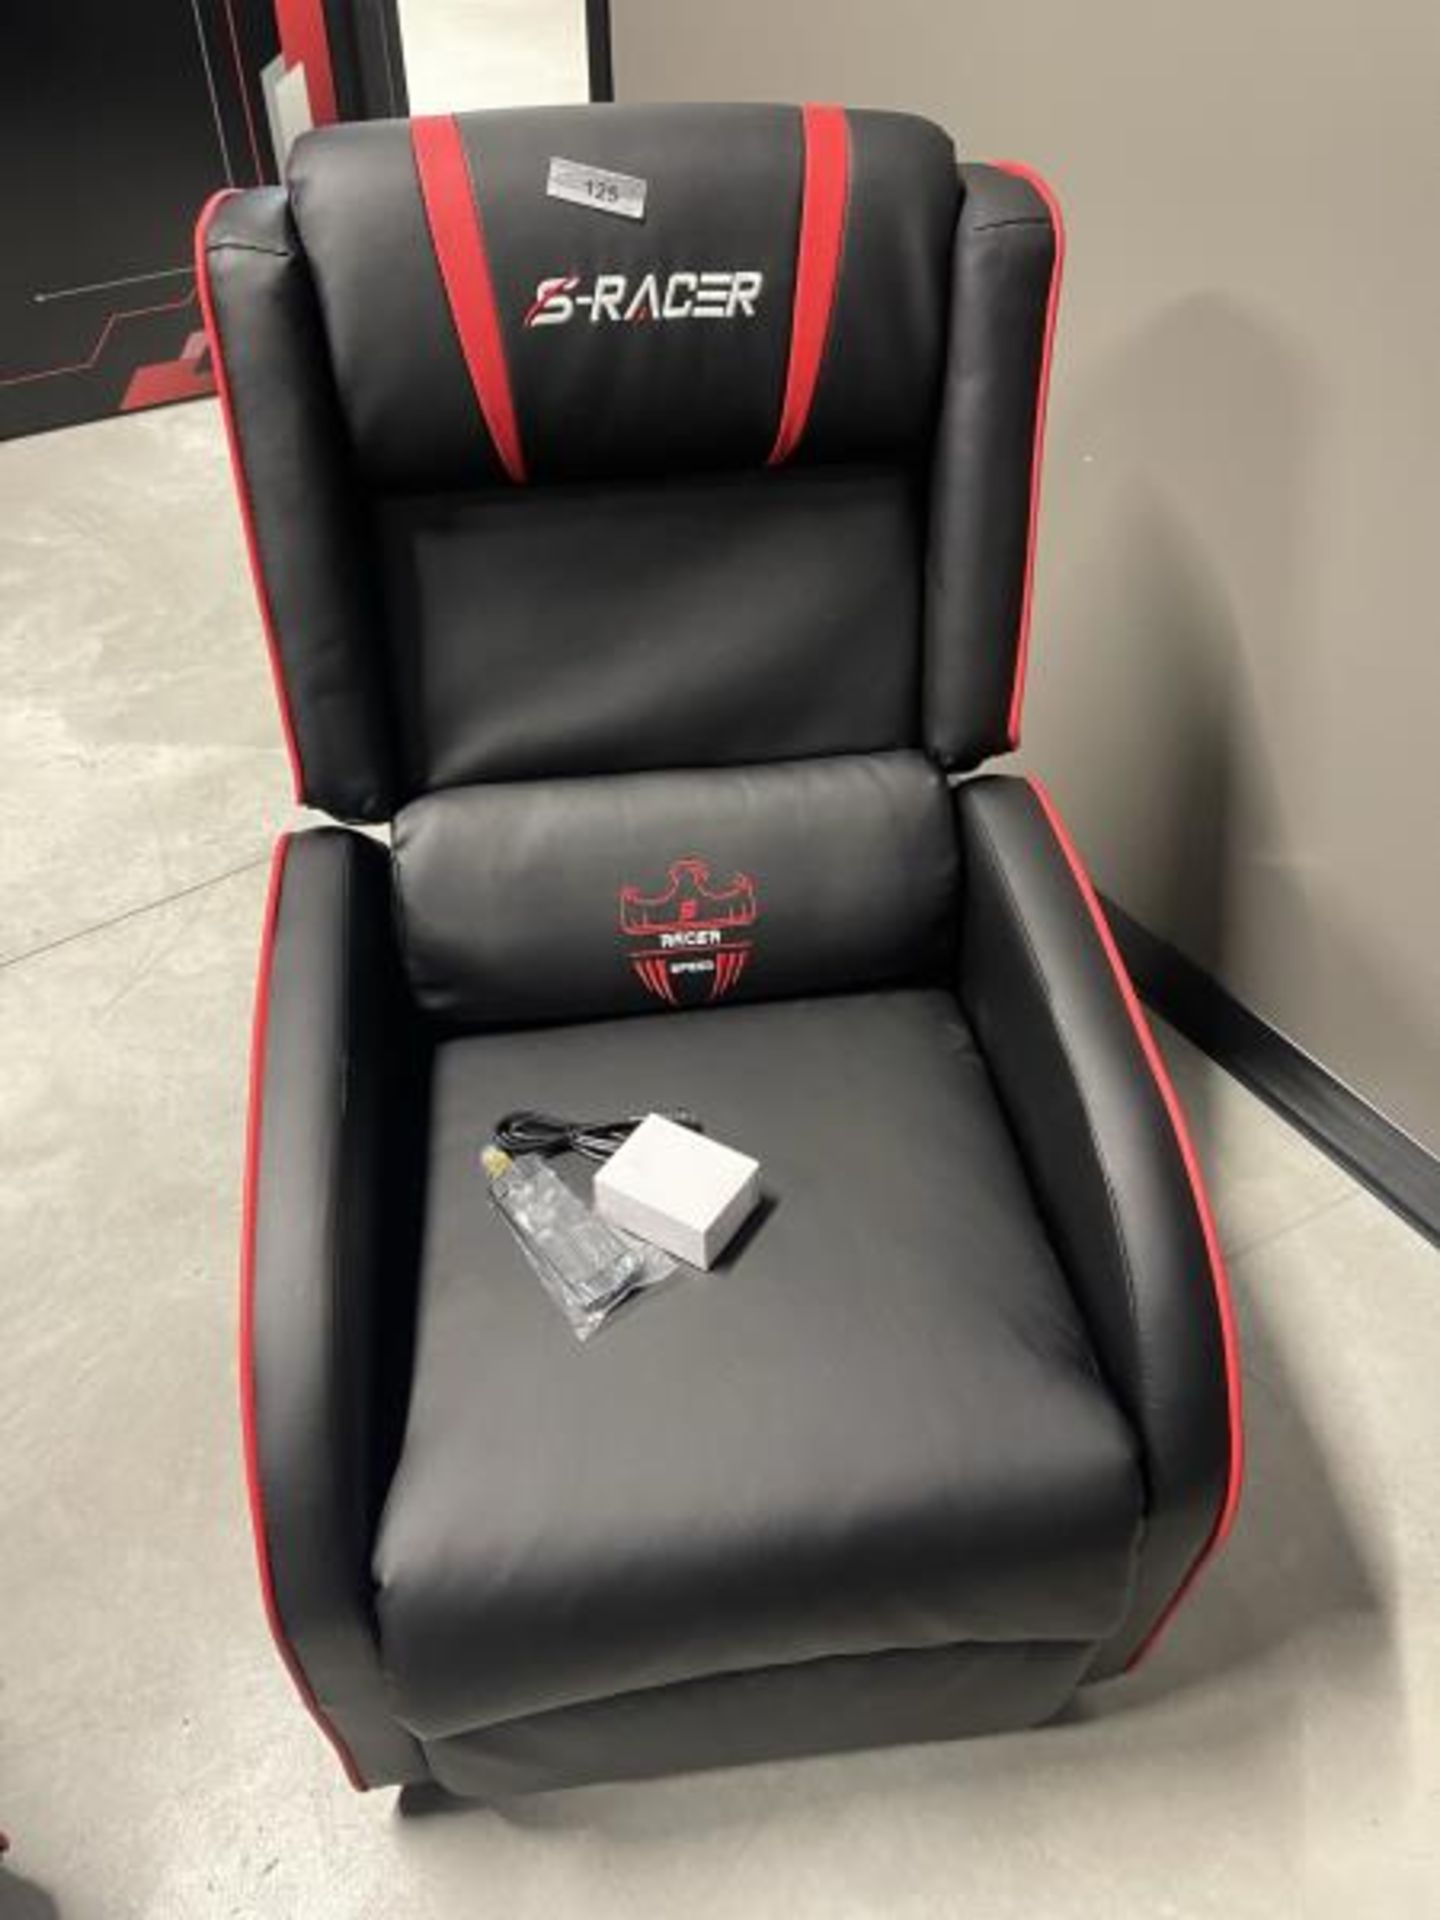 S-Racer Gaming Recliner w/ Power Adapter and Remote